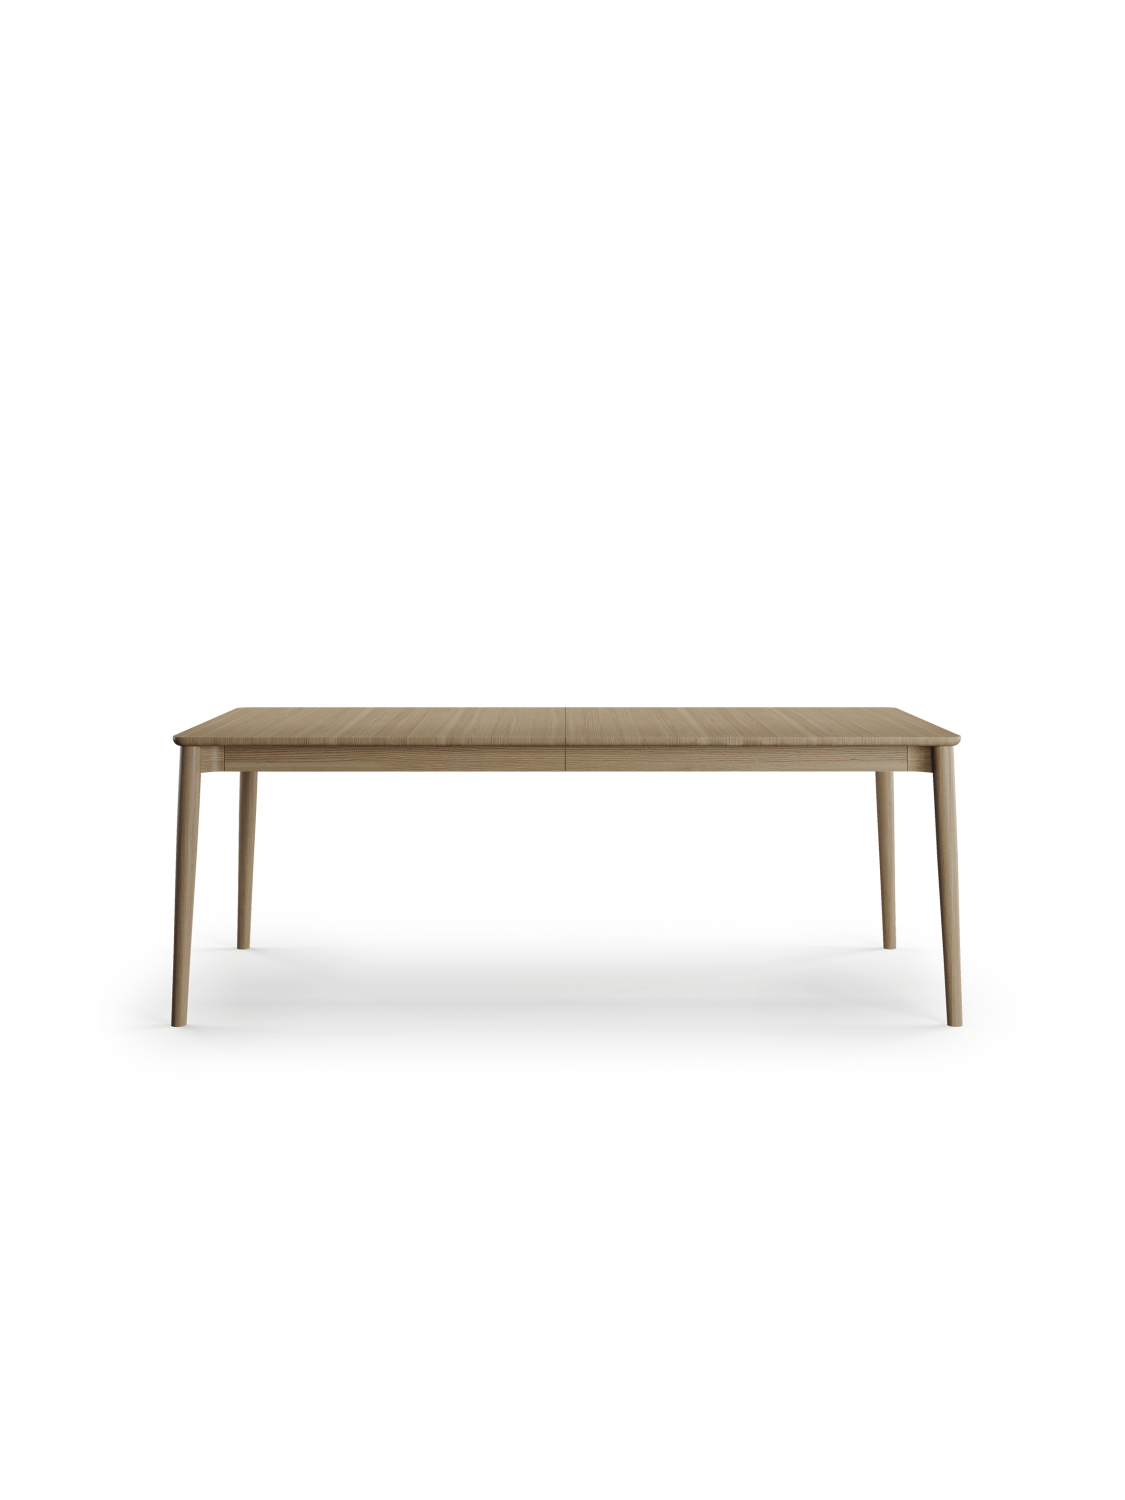 Northern - Expand Dining Table 90x200 cm - Light Oiled Oak